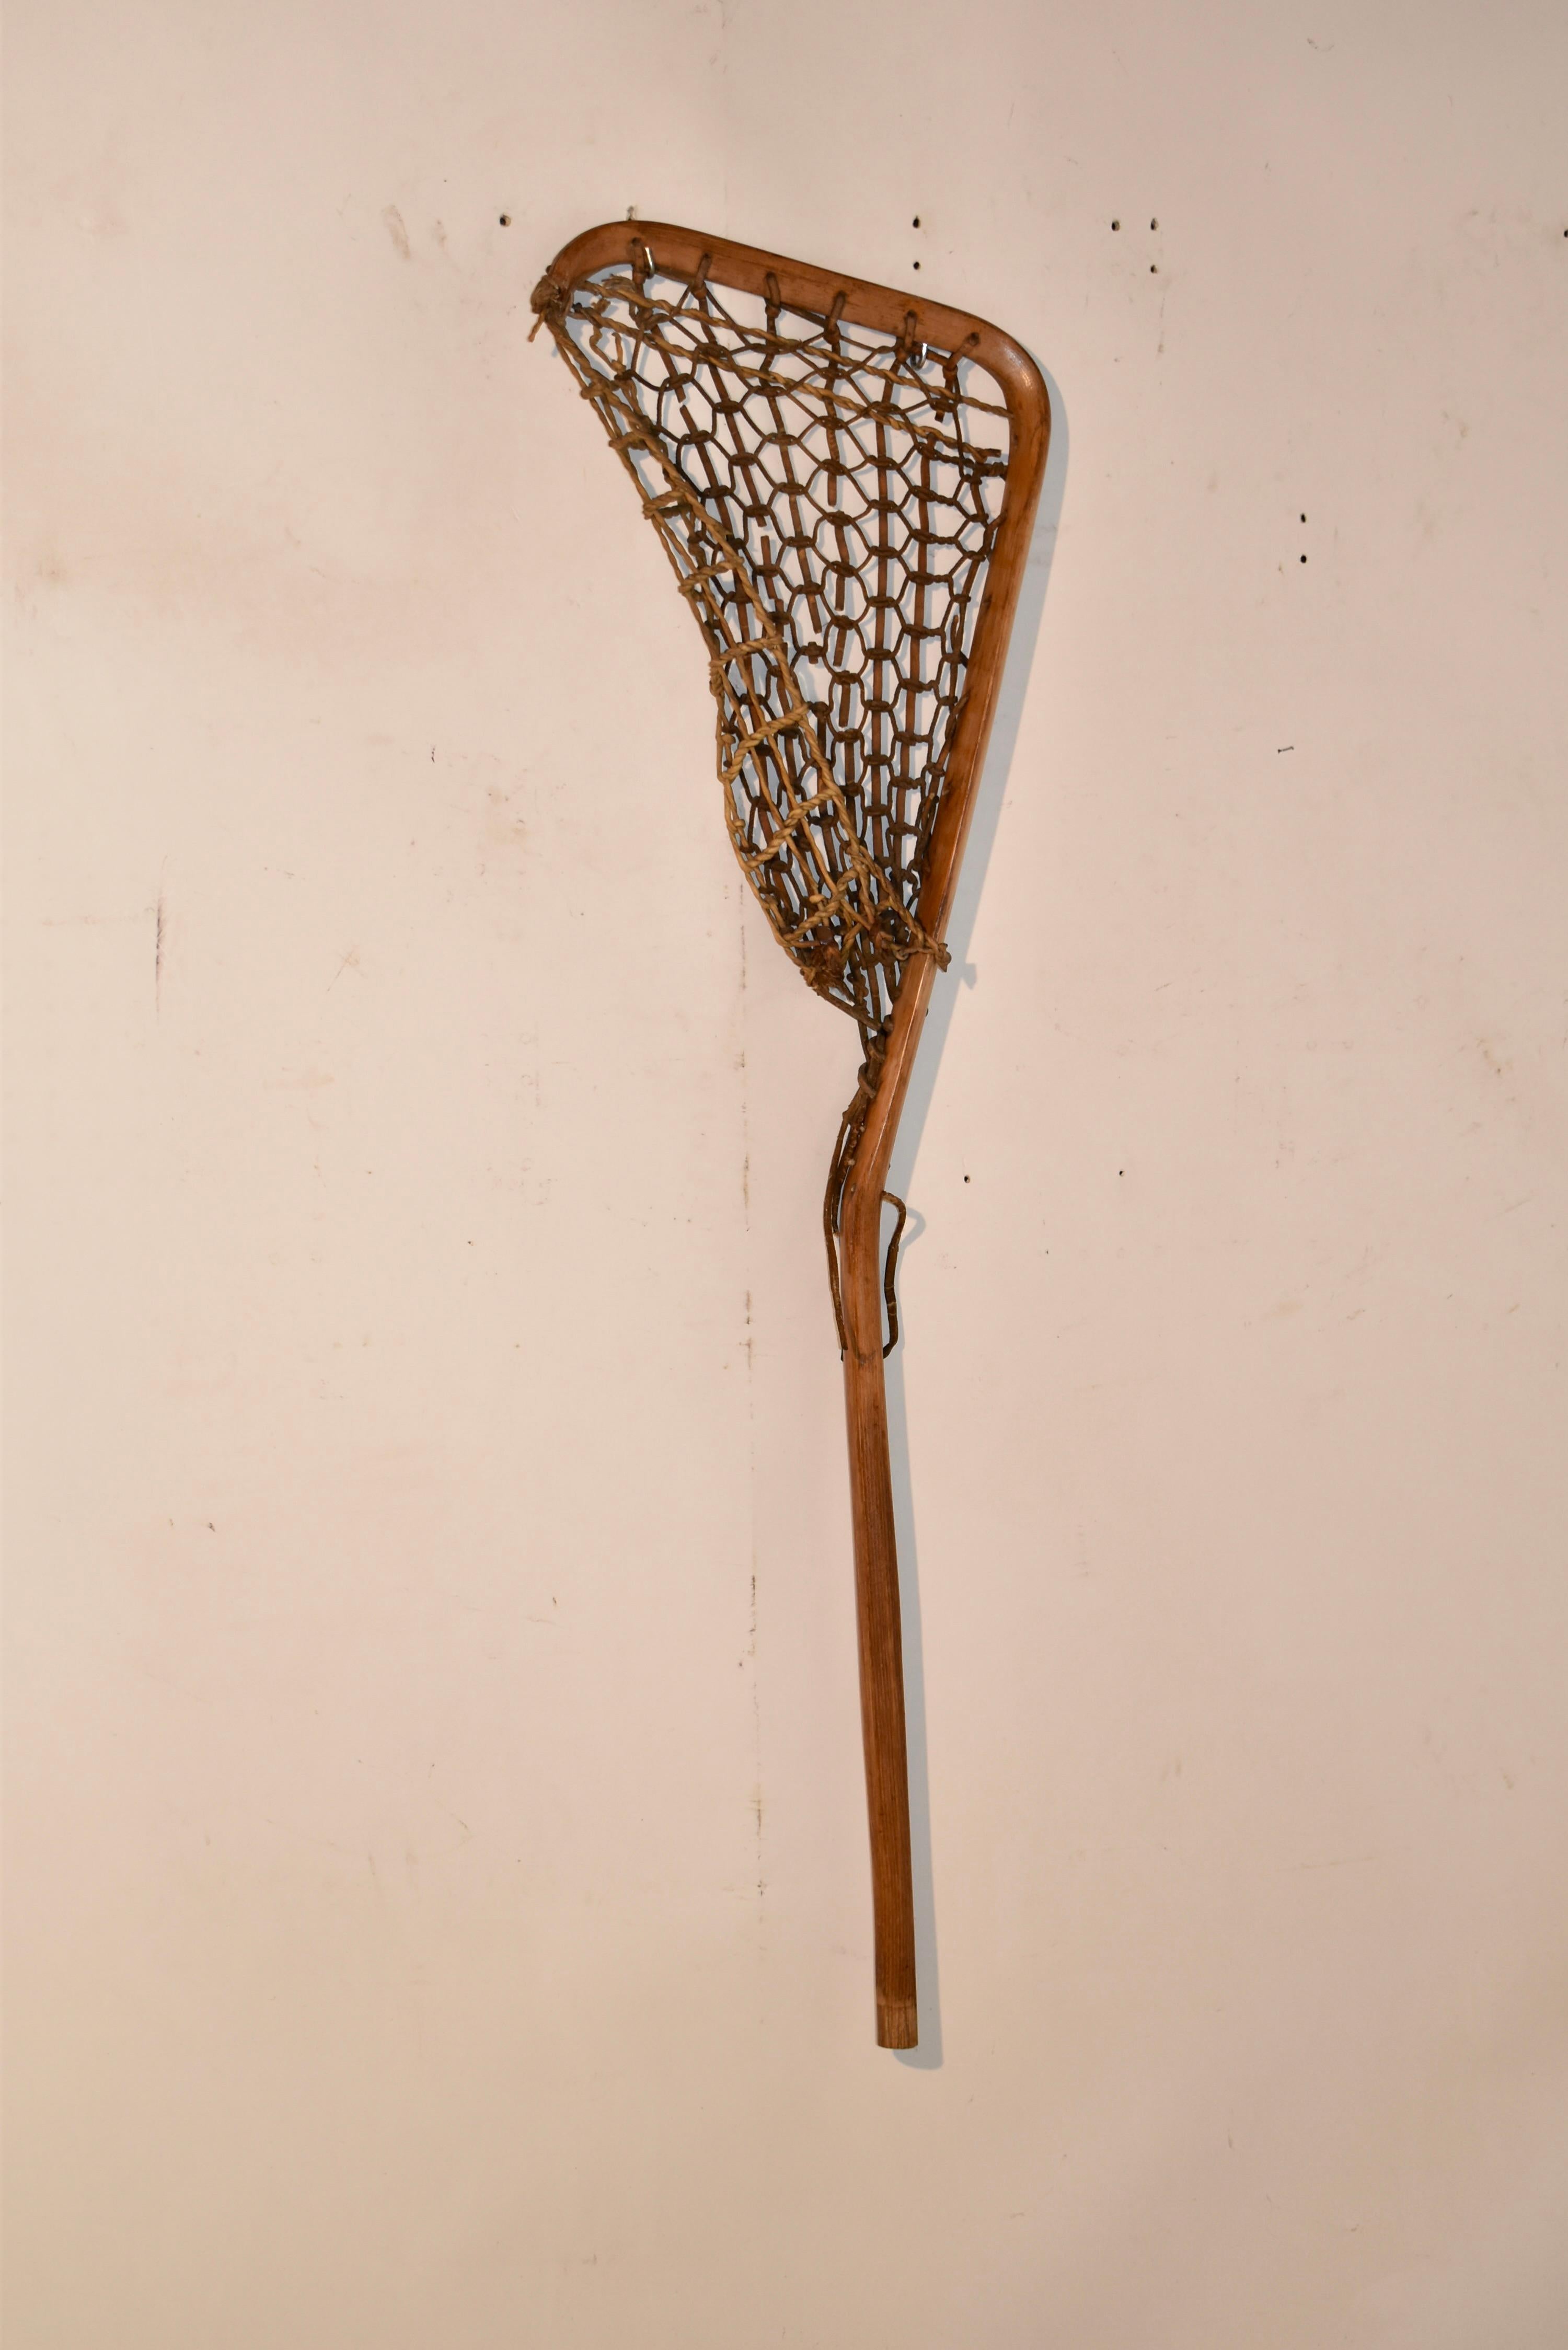 Circa 1920's lacrosse stick made form hickory.  The net is woven from leather and twine.  This is a beautifully formed bentwood stick that would look great in any room of the house! 